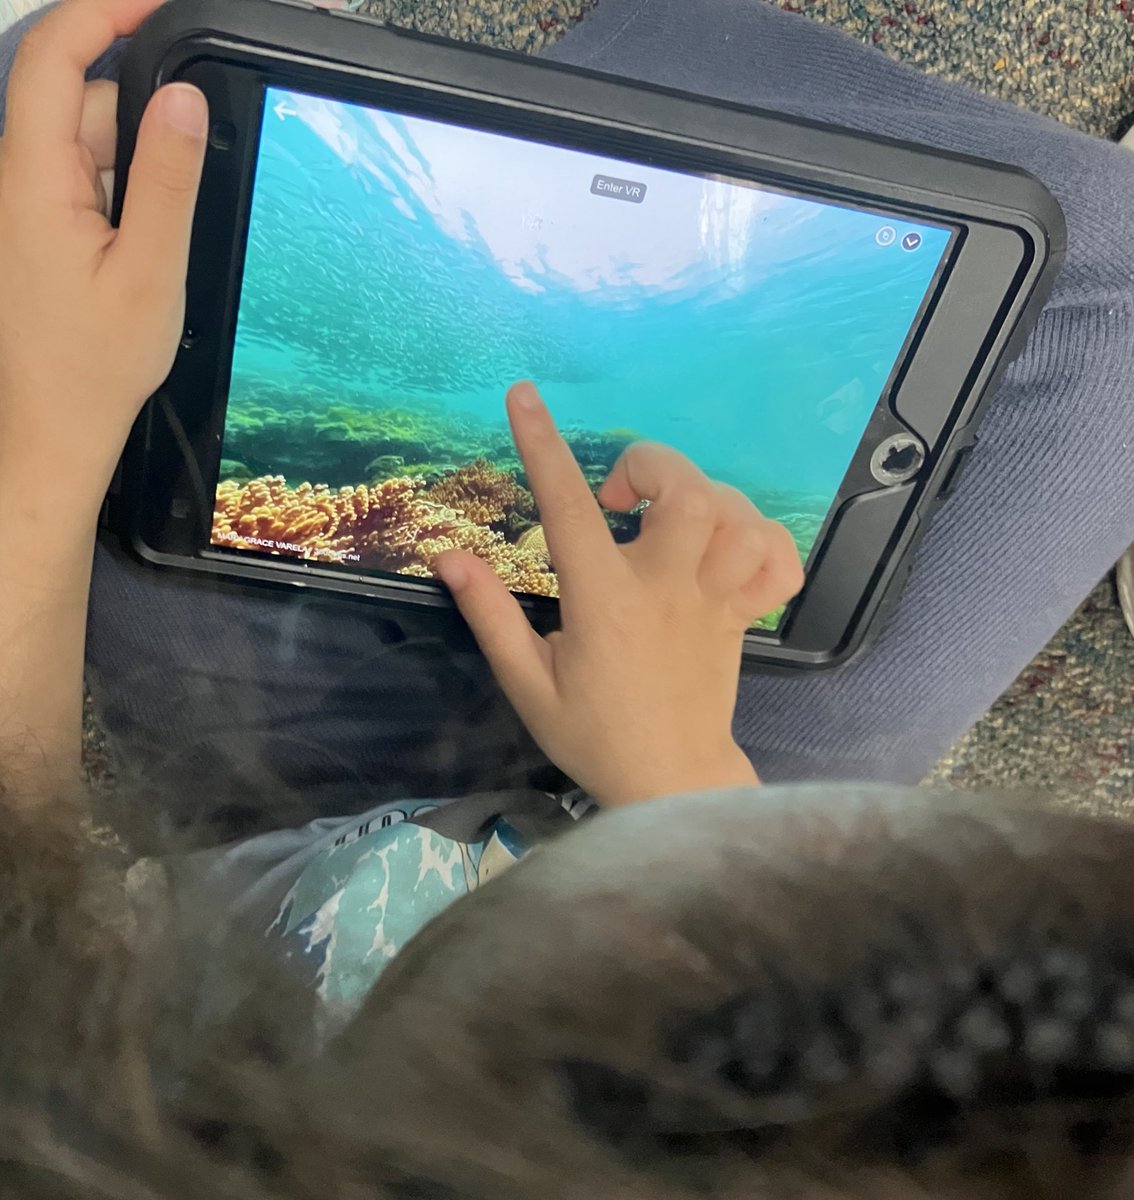 1st graders in @KRadzicki’s class at @HayesHawks learned how animals depend on their environments in our @nearpod lesson!🌳🐒 We watched an interactive video, explored 3D animals, and went on virtual field trips to different habitats! #KISDelemtech